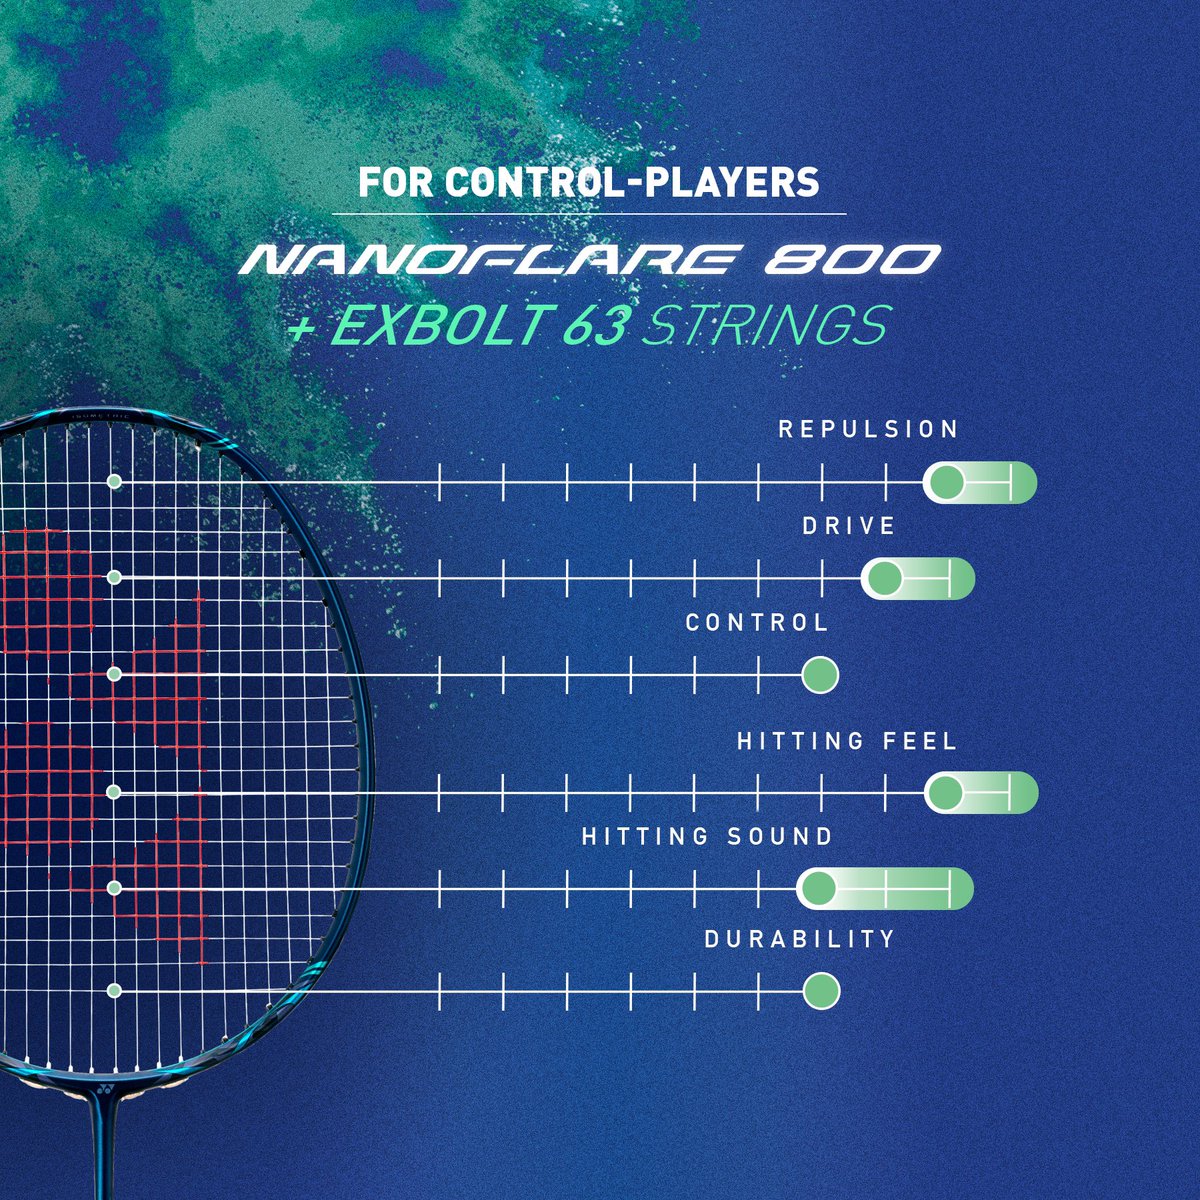 How should you boost the new NANOFLARE 800? Here are our recommendations depending upon your personal play style.   For hard-hitters, we recommend EXBOLT 65 to add power and repulsion. Control players on the other hand will love EXBOLT 63 for quick drive shots.   #NANOFLARE800